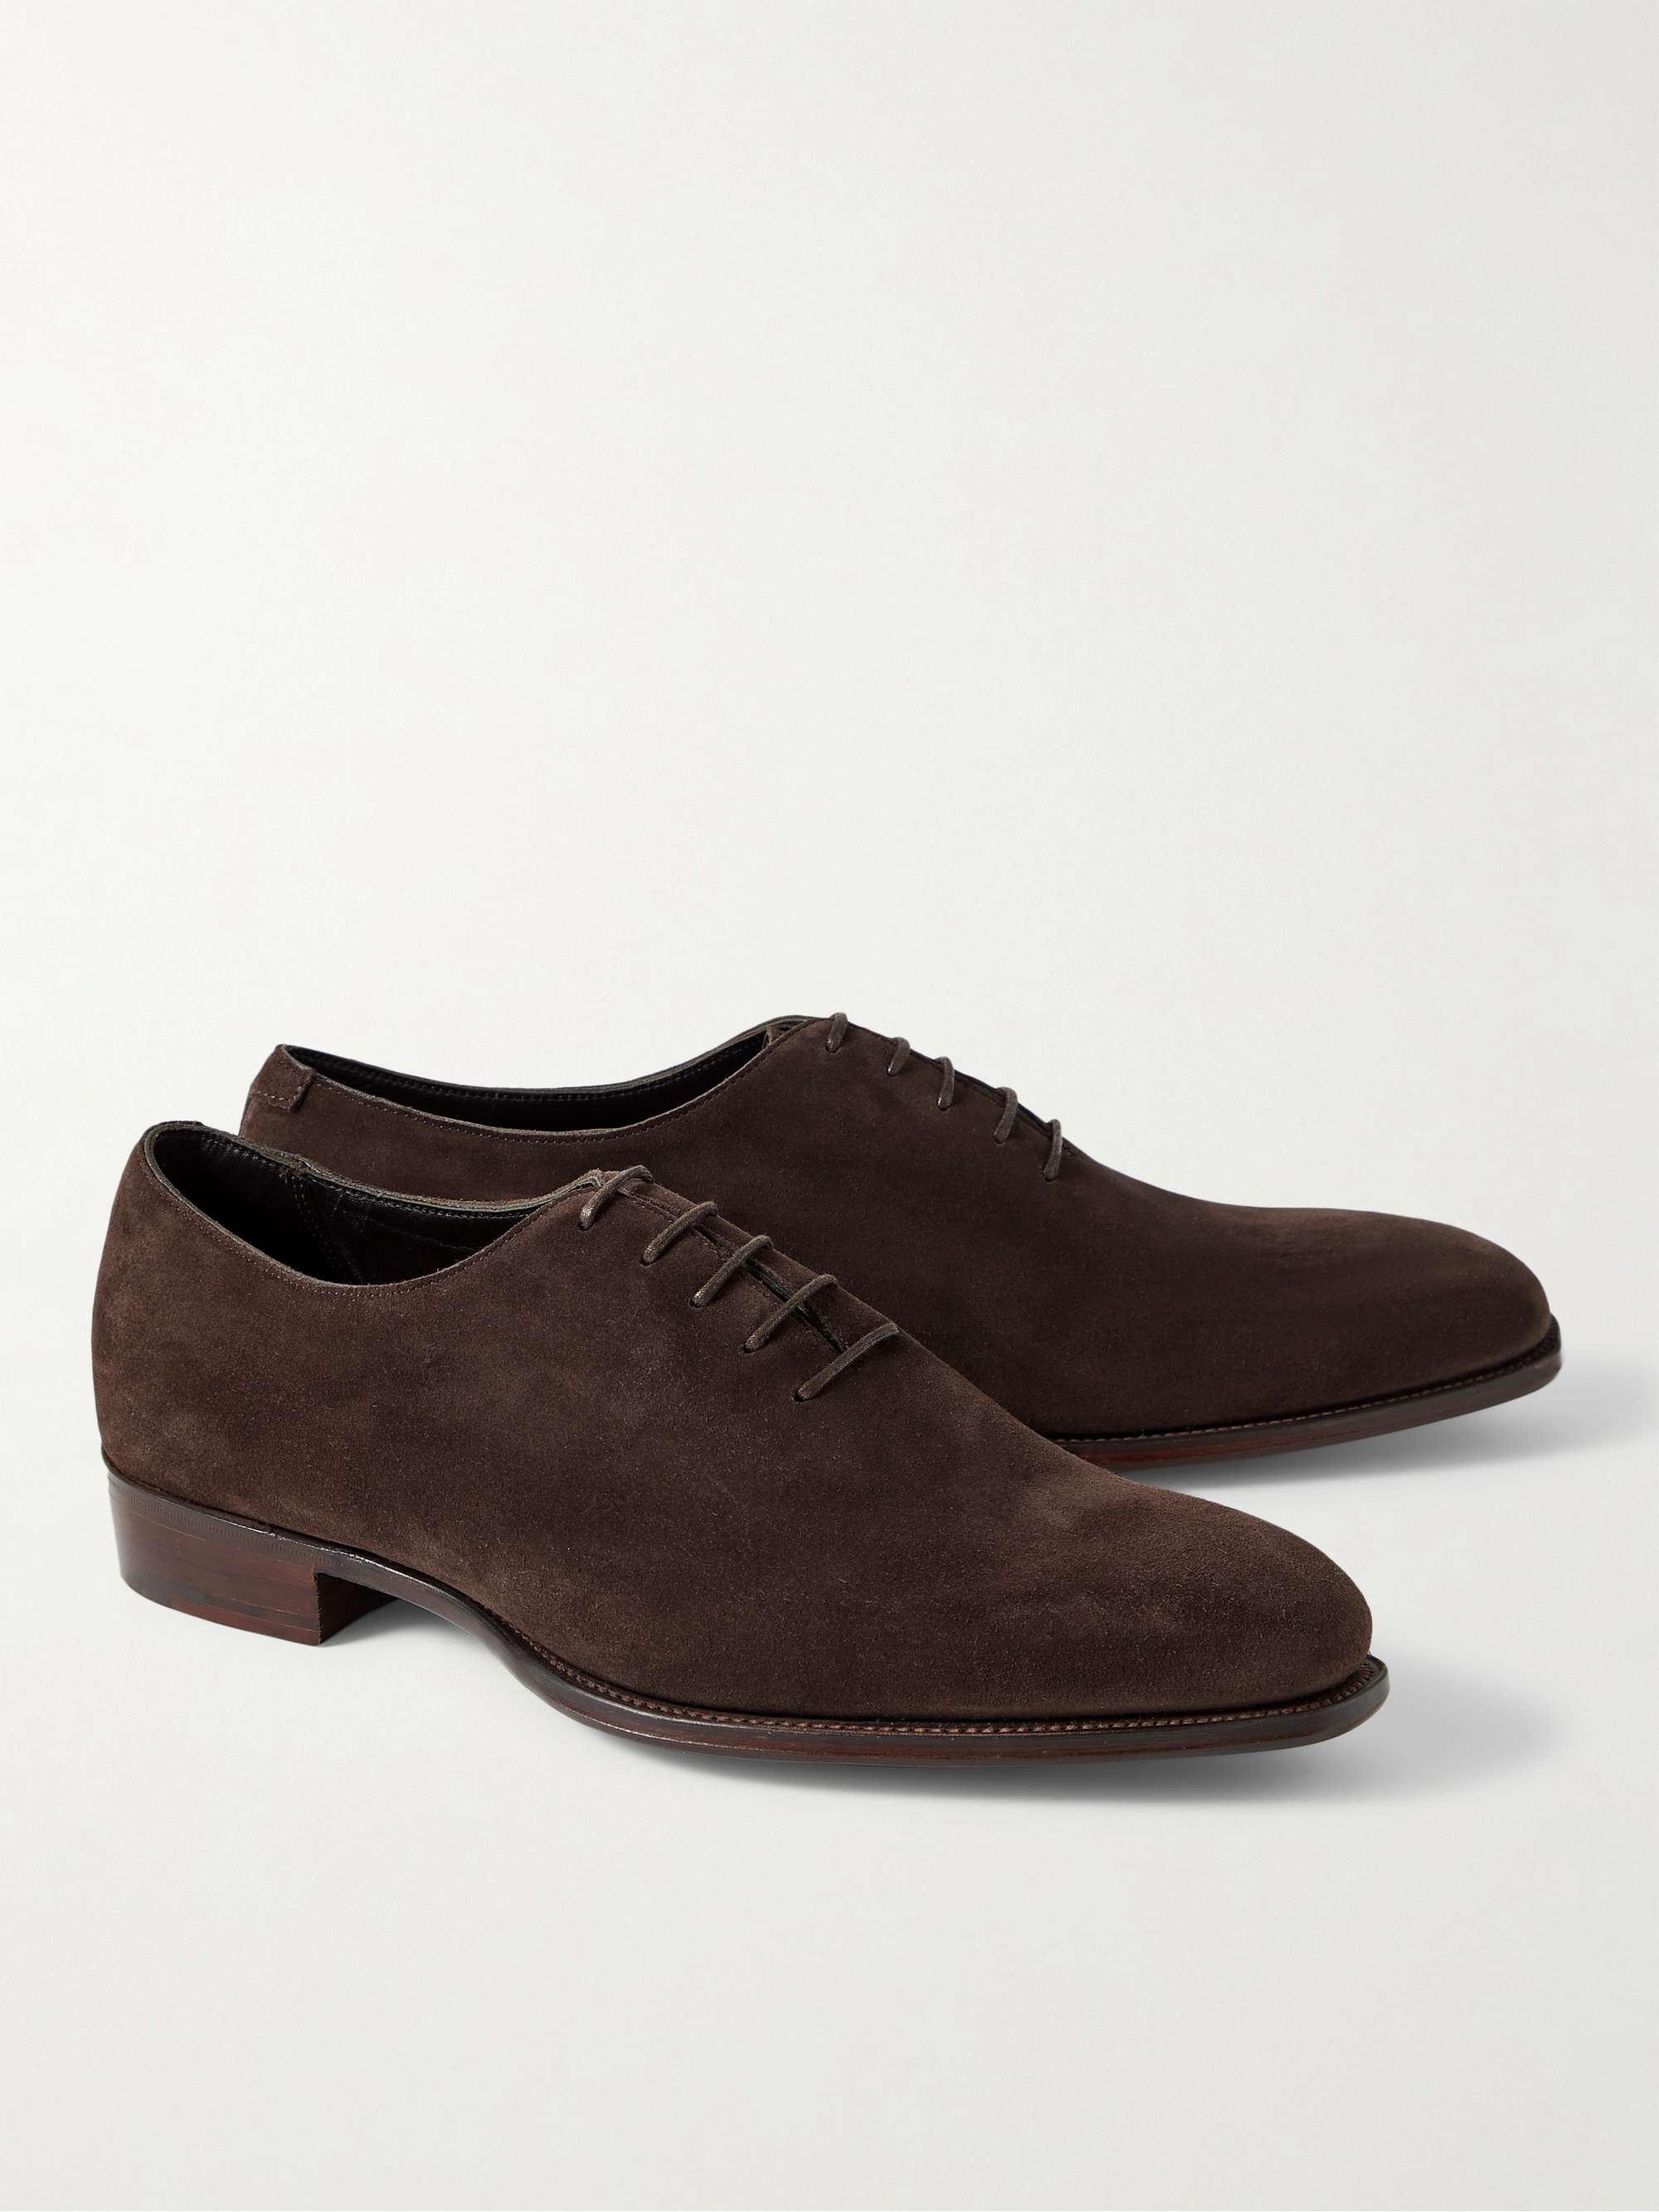 GEORGE CLEVERLEY Merlin Whole-Cut Suede Oxford Shoes